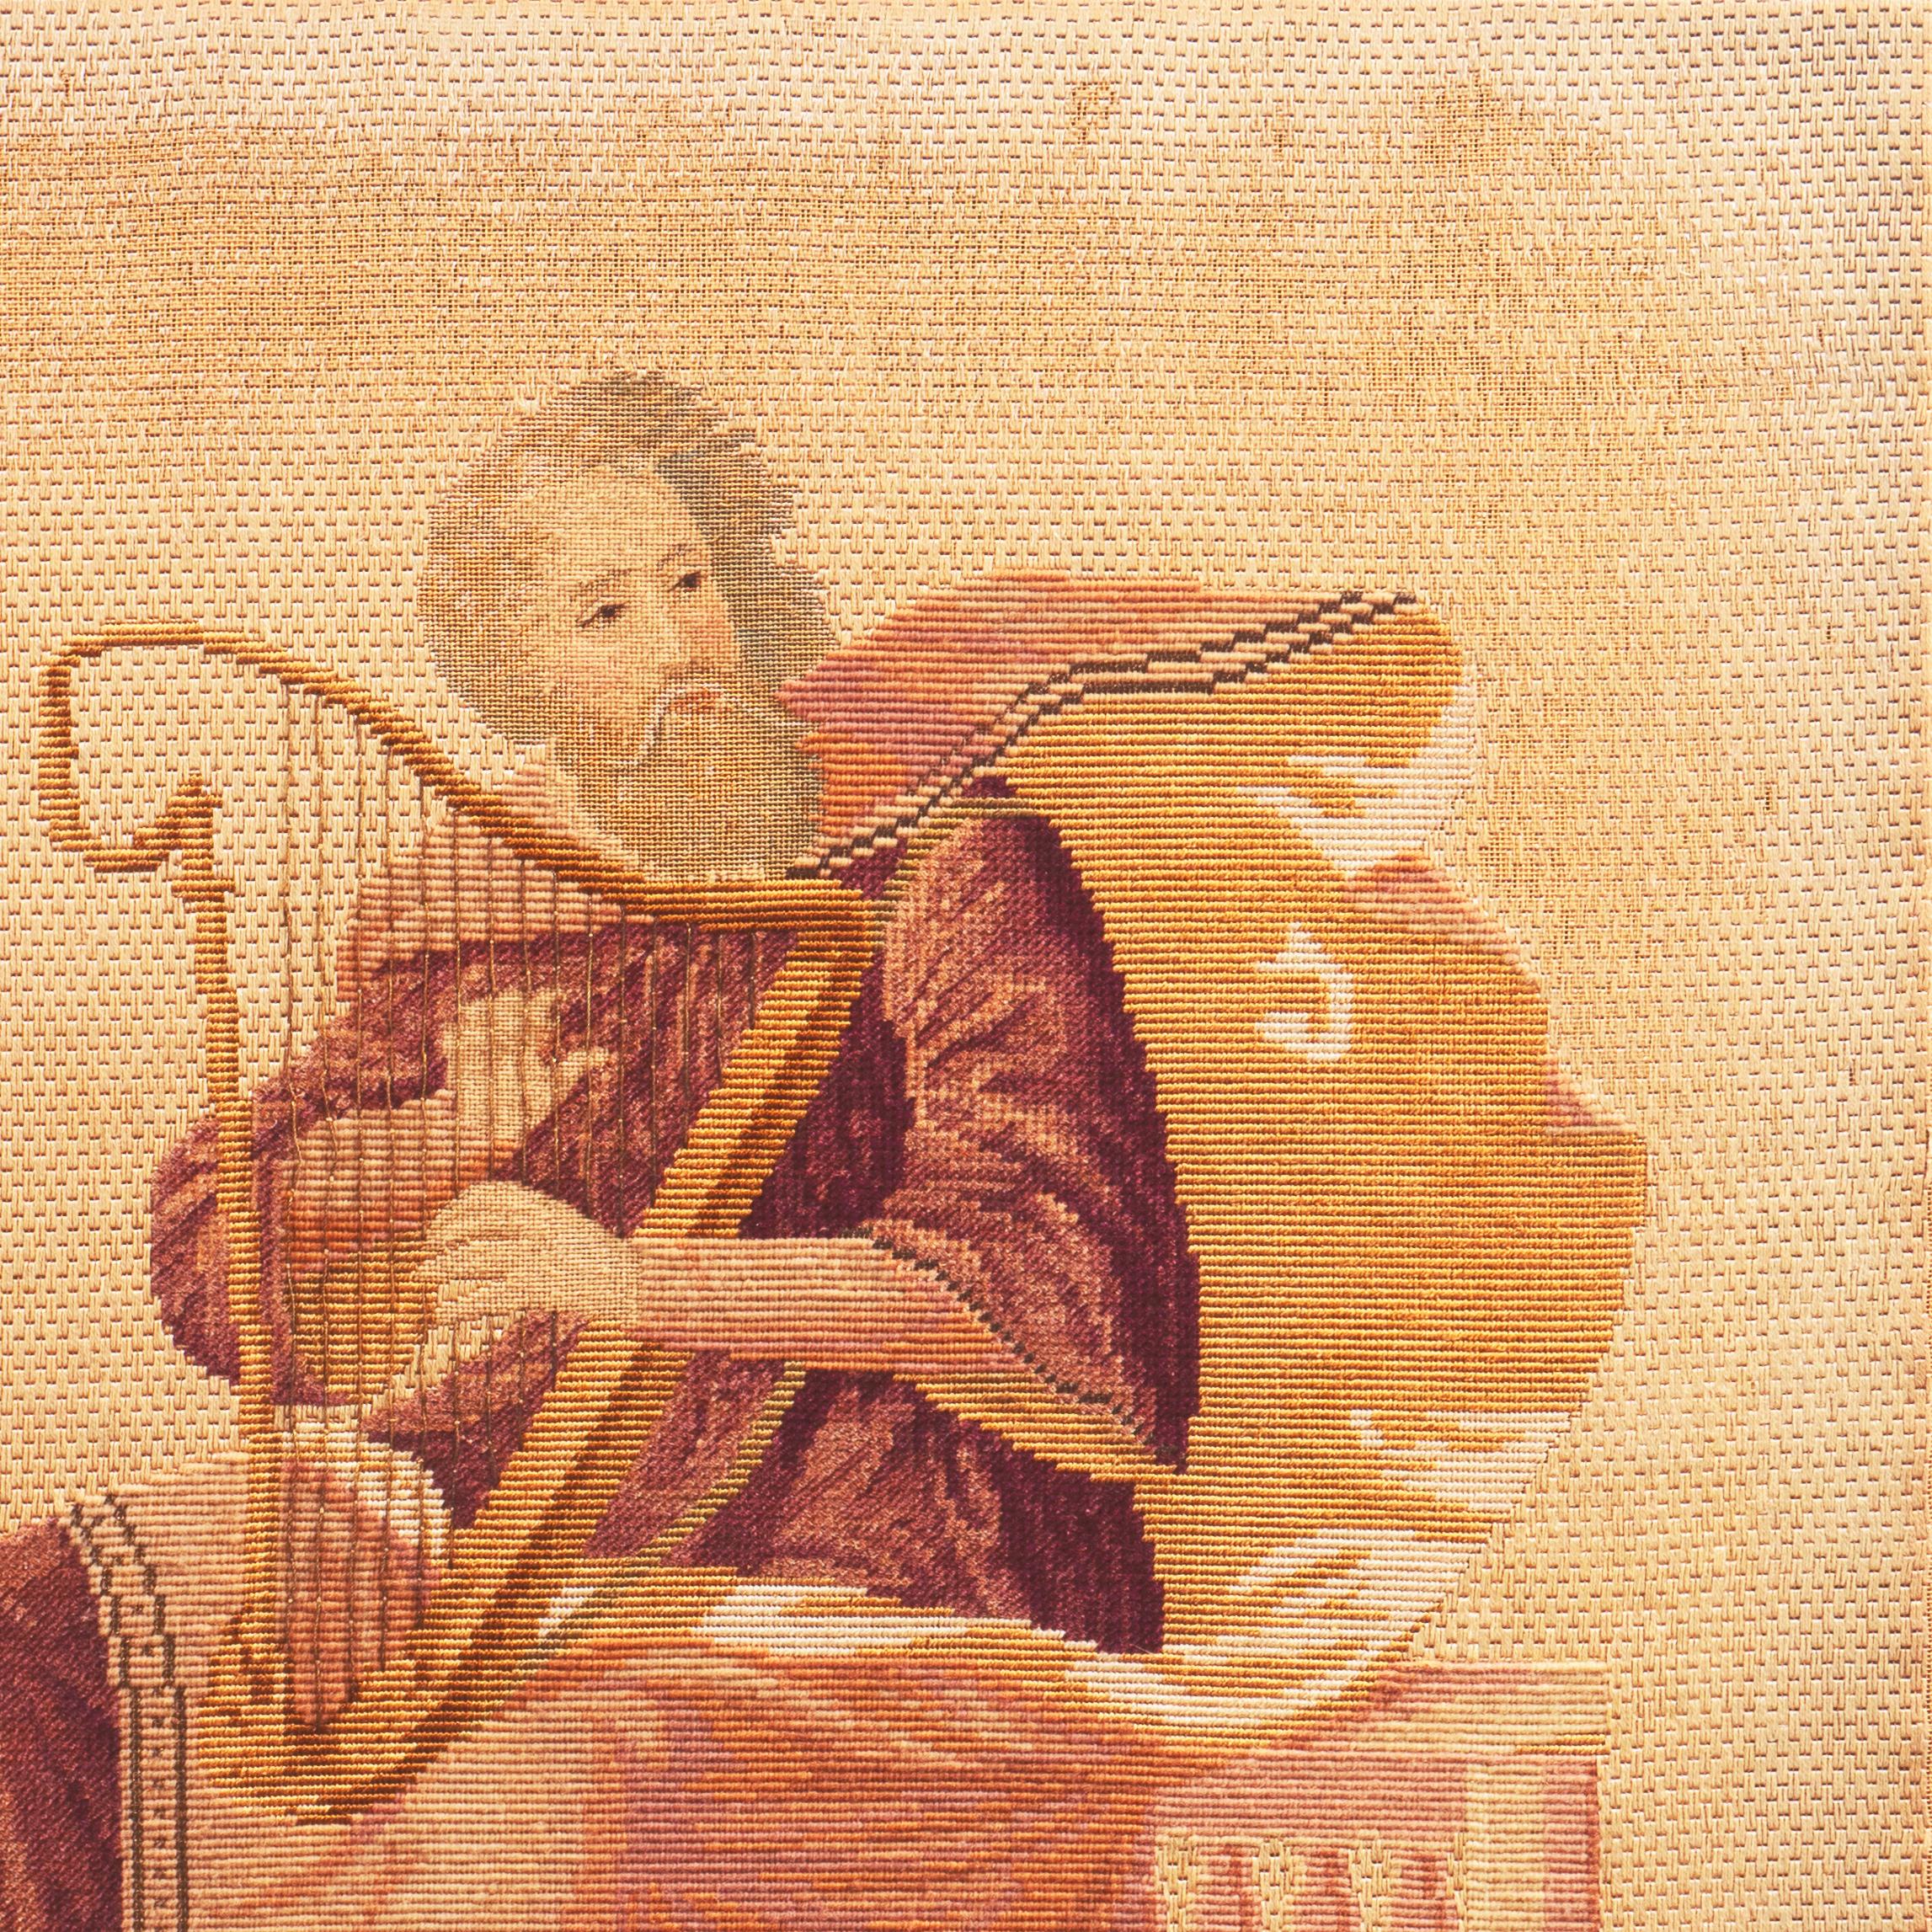 A substantial mid-nineteenth century figural embroidery showing the bard with a full beard playing a lyre, seated on a classical colonnade and gazing sightlessly to his right. Created circa 1860.